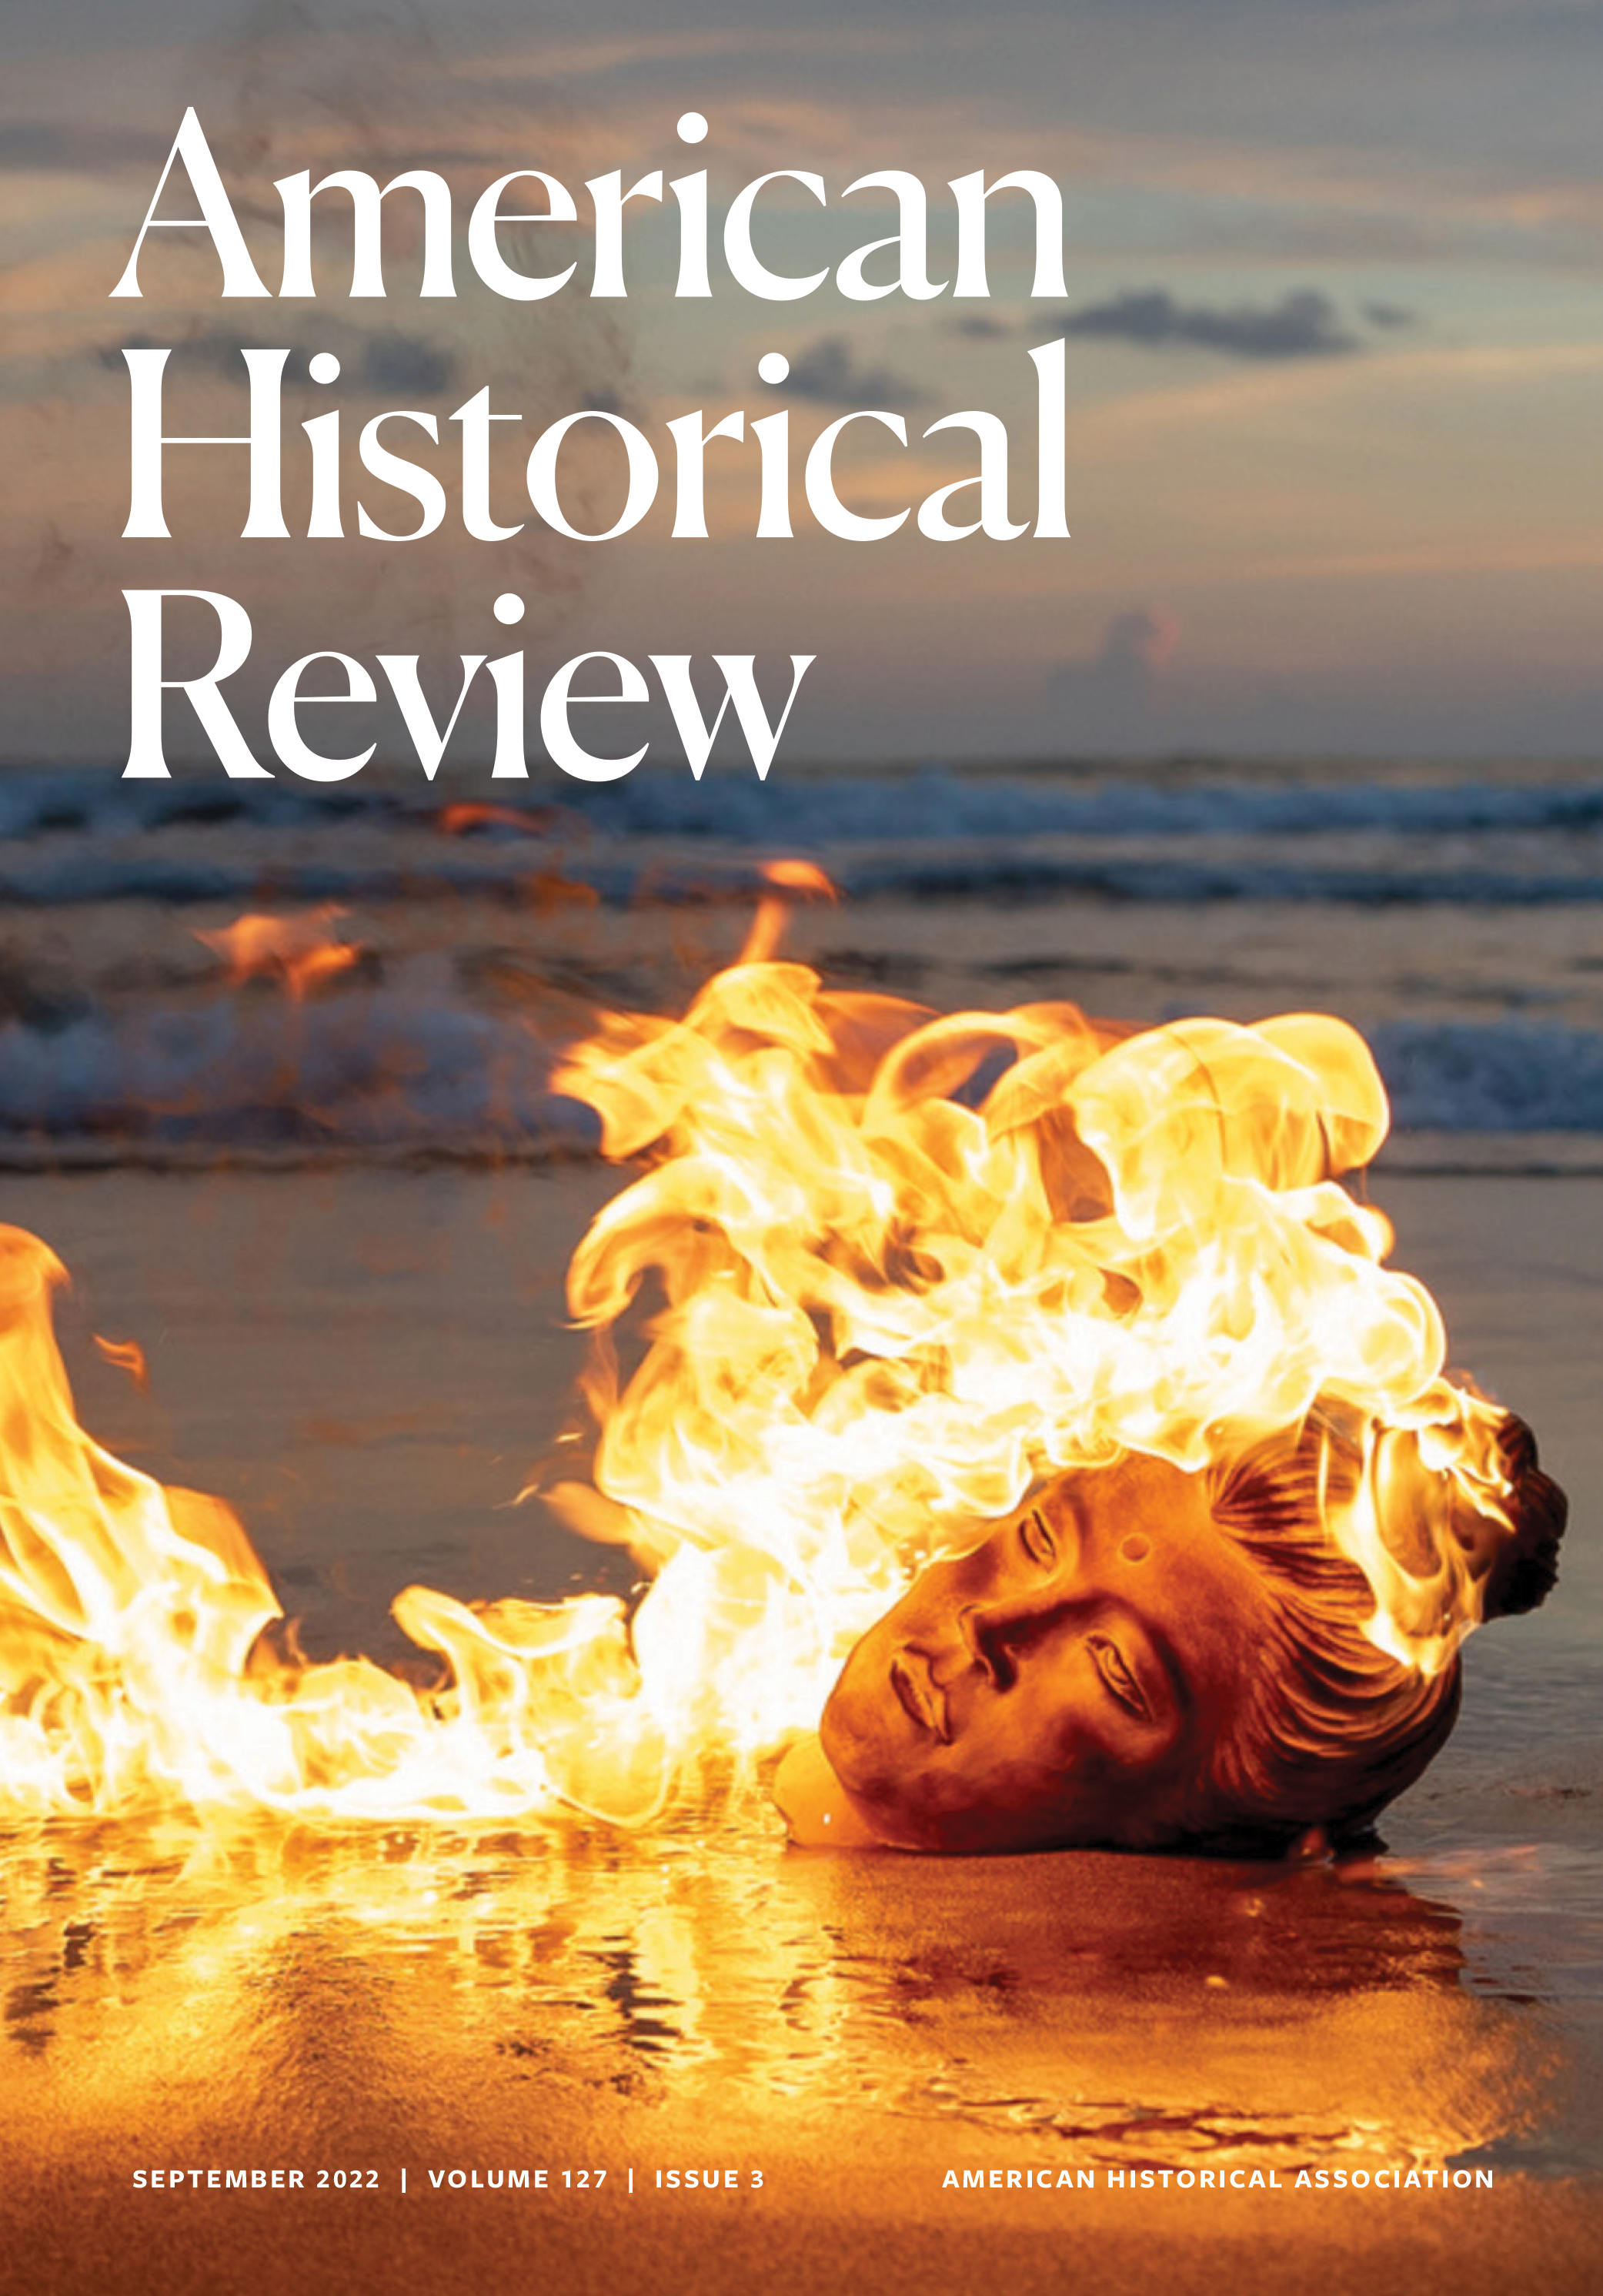 Cover of the September 2022 issue of the American Historical Review